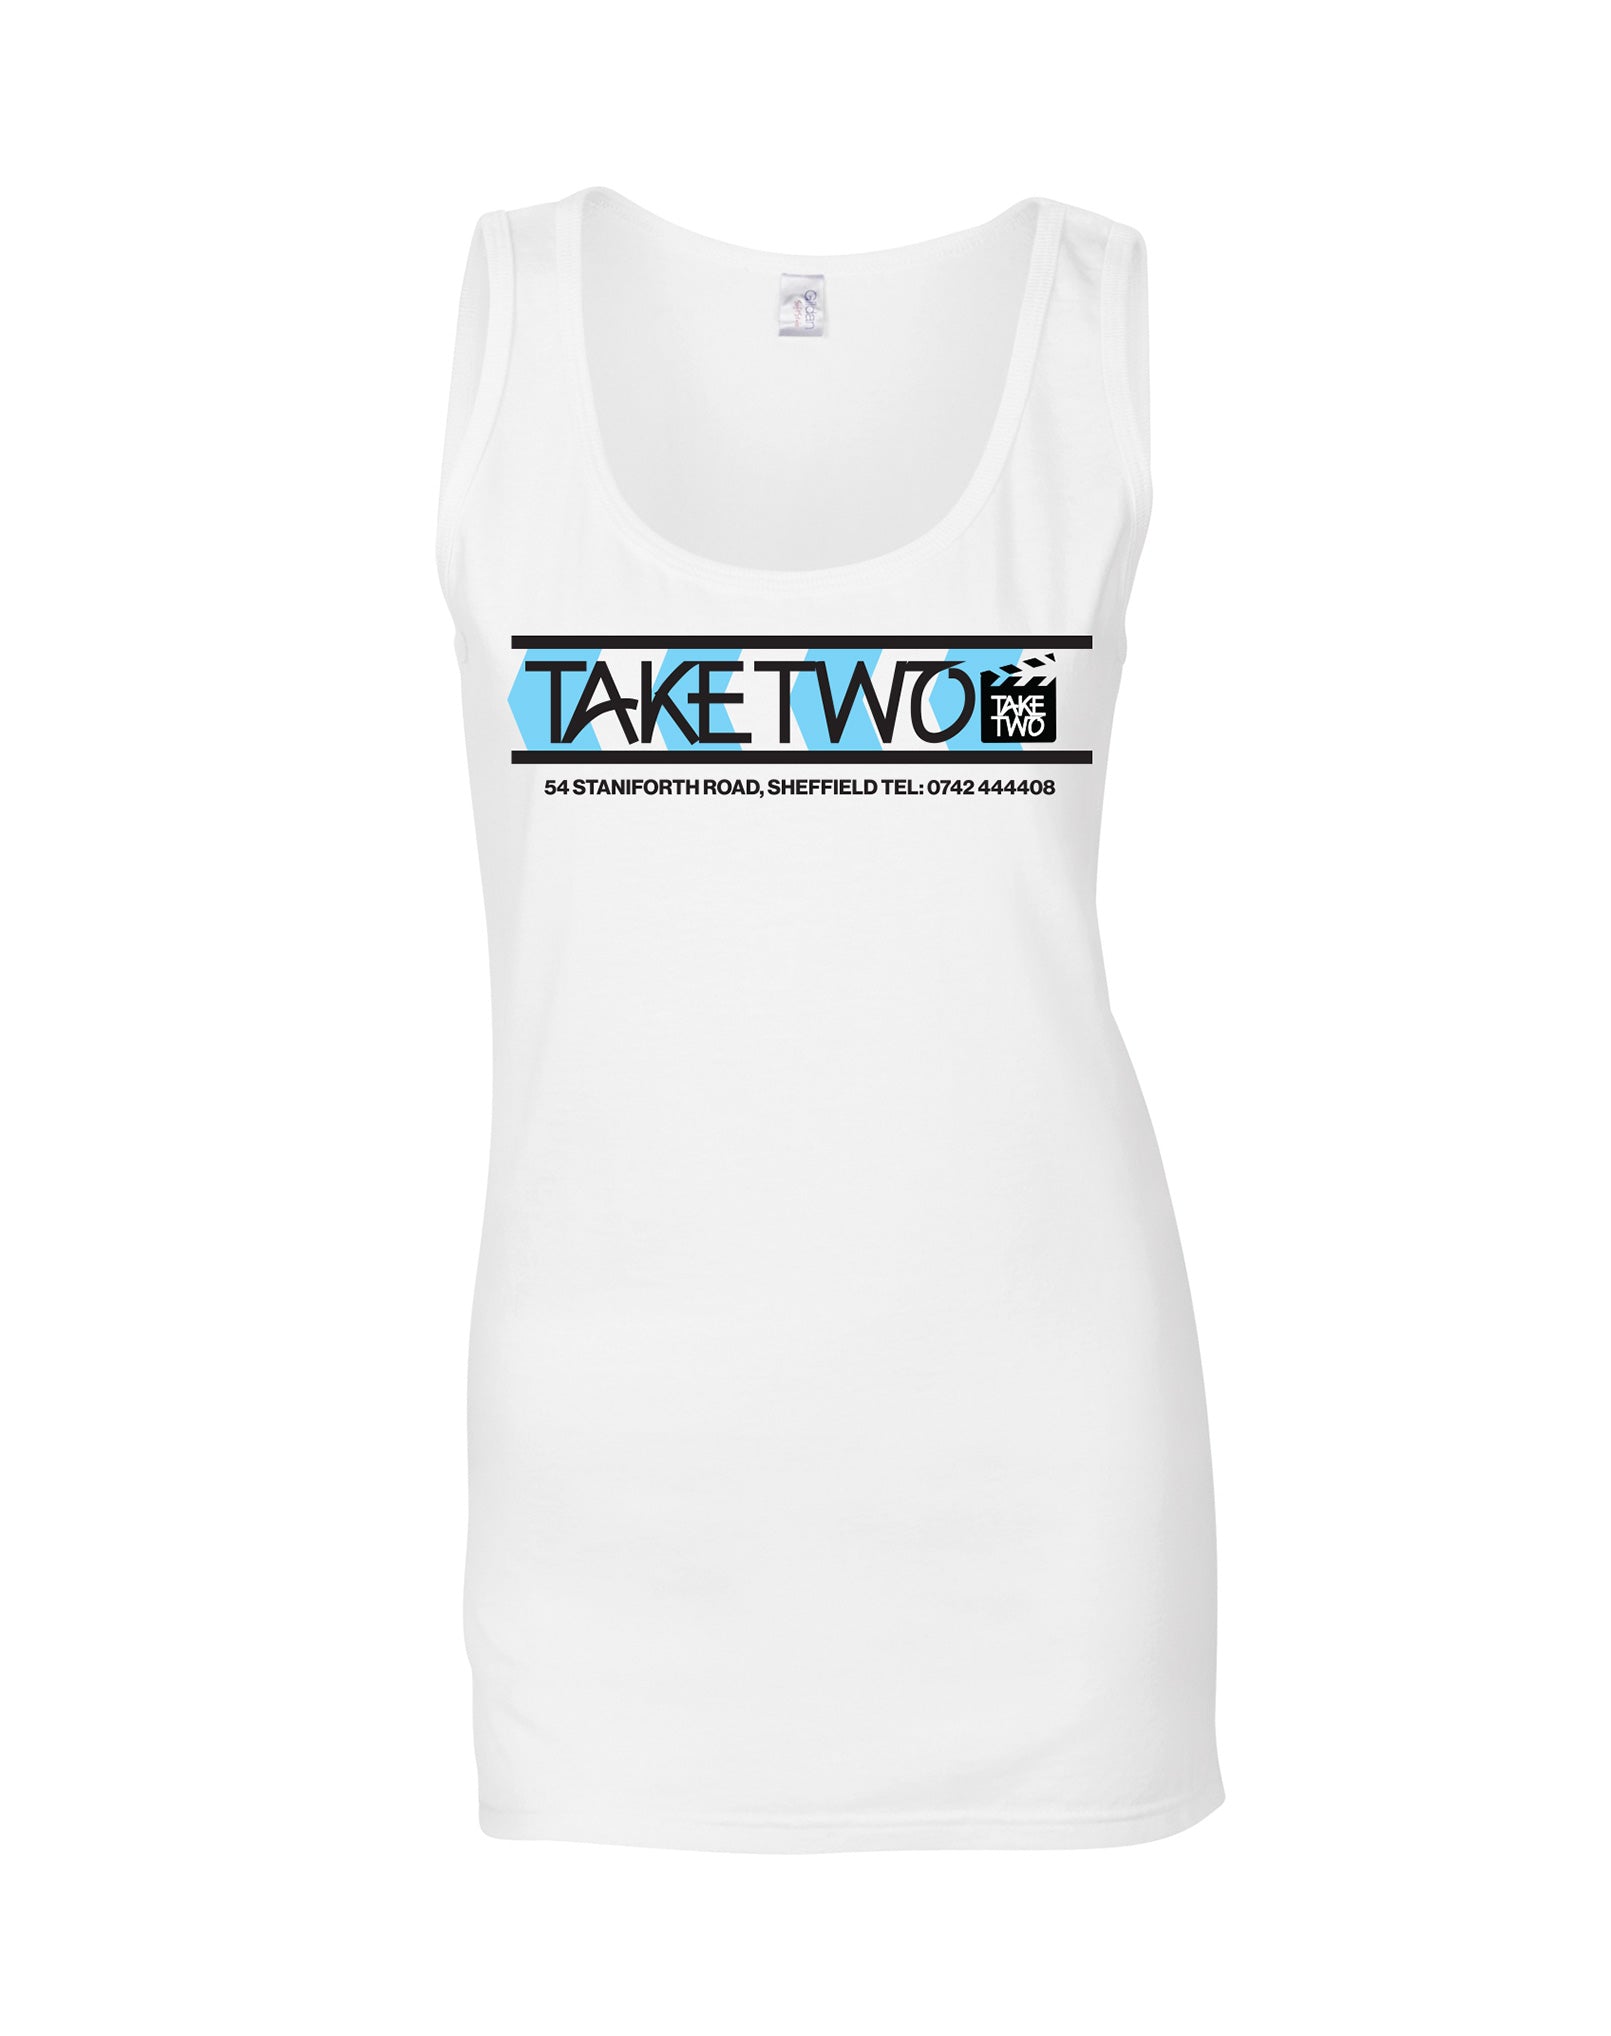 Take Two ladies fit vest - various colours - Dirty Stop Outs